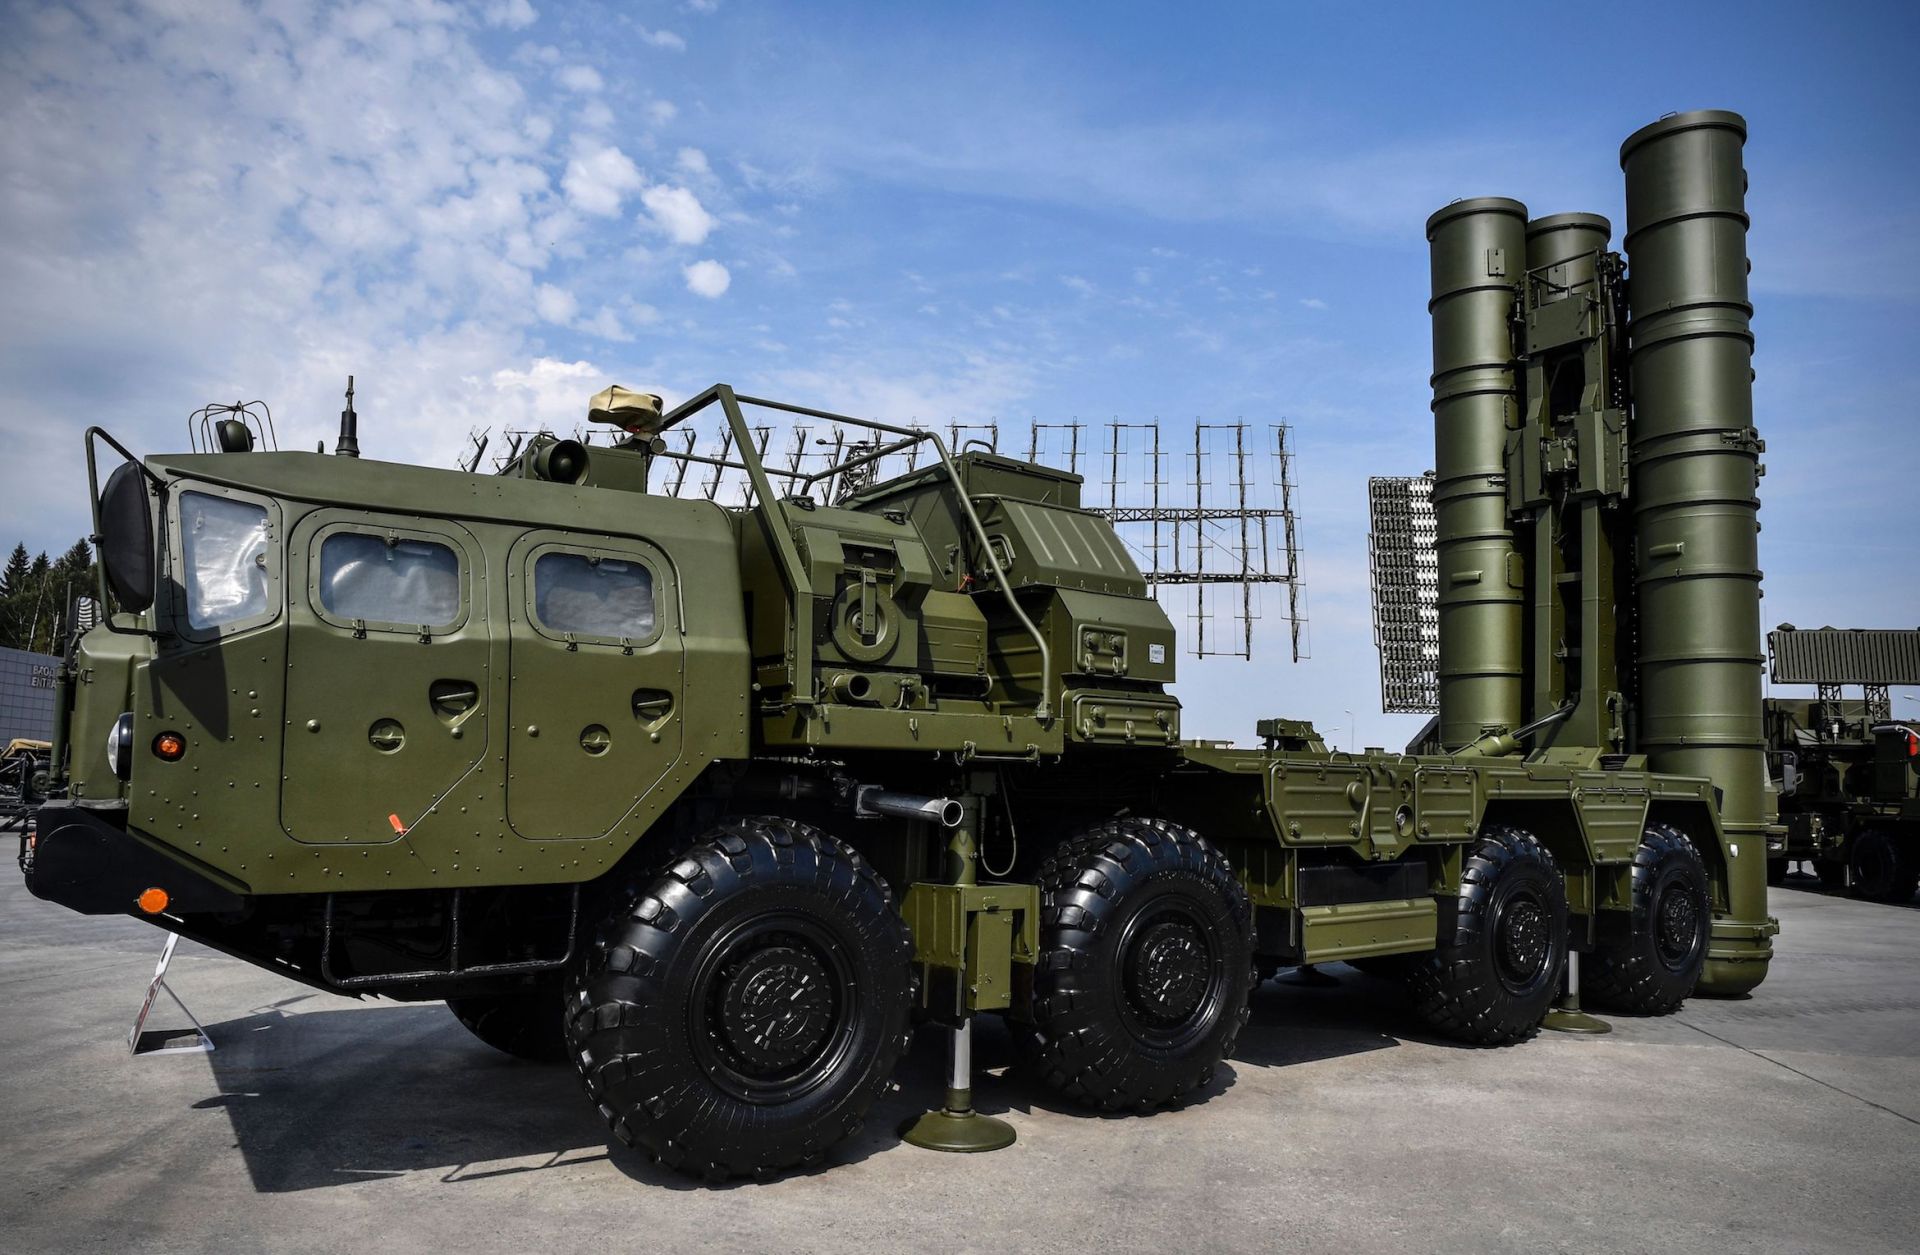 Russia's S-400 air defense system stands on display in Kubinka Park near Moscow.